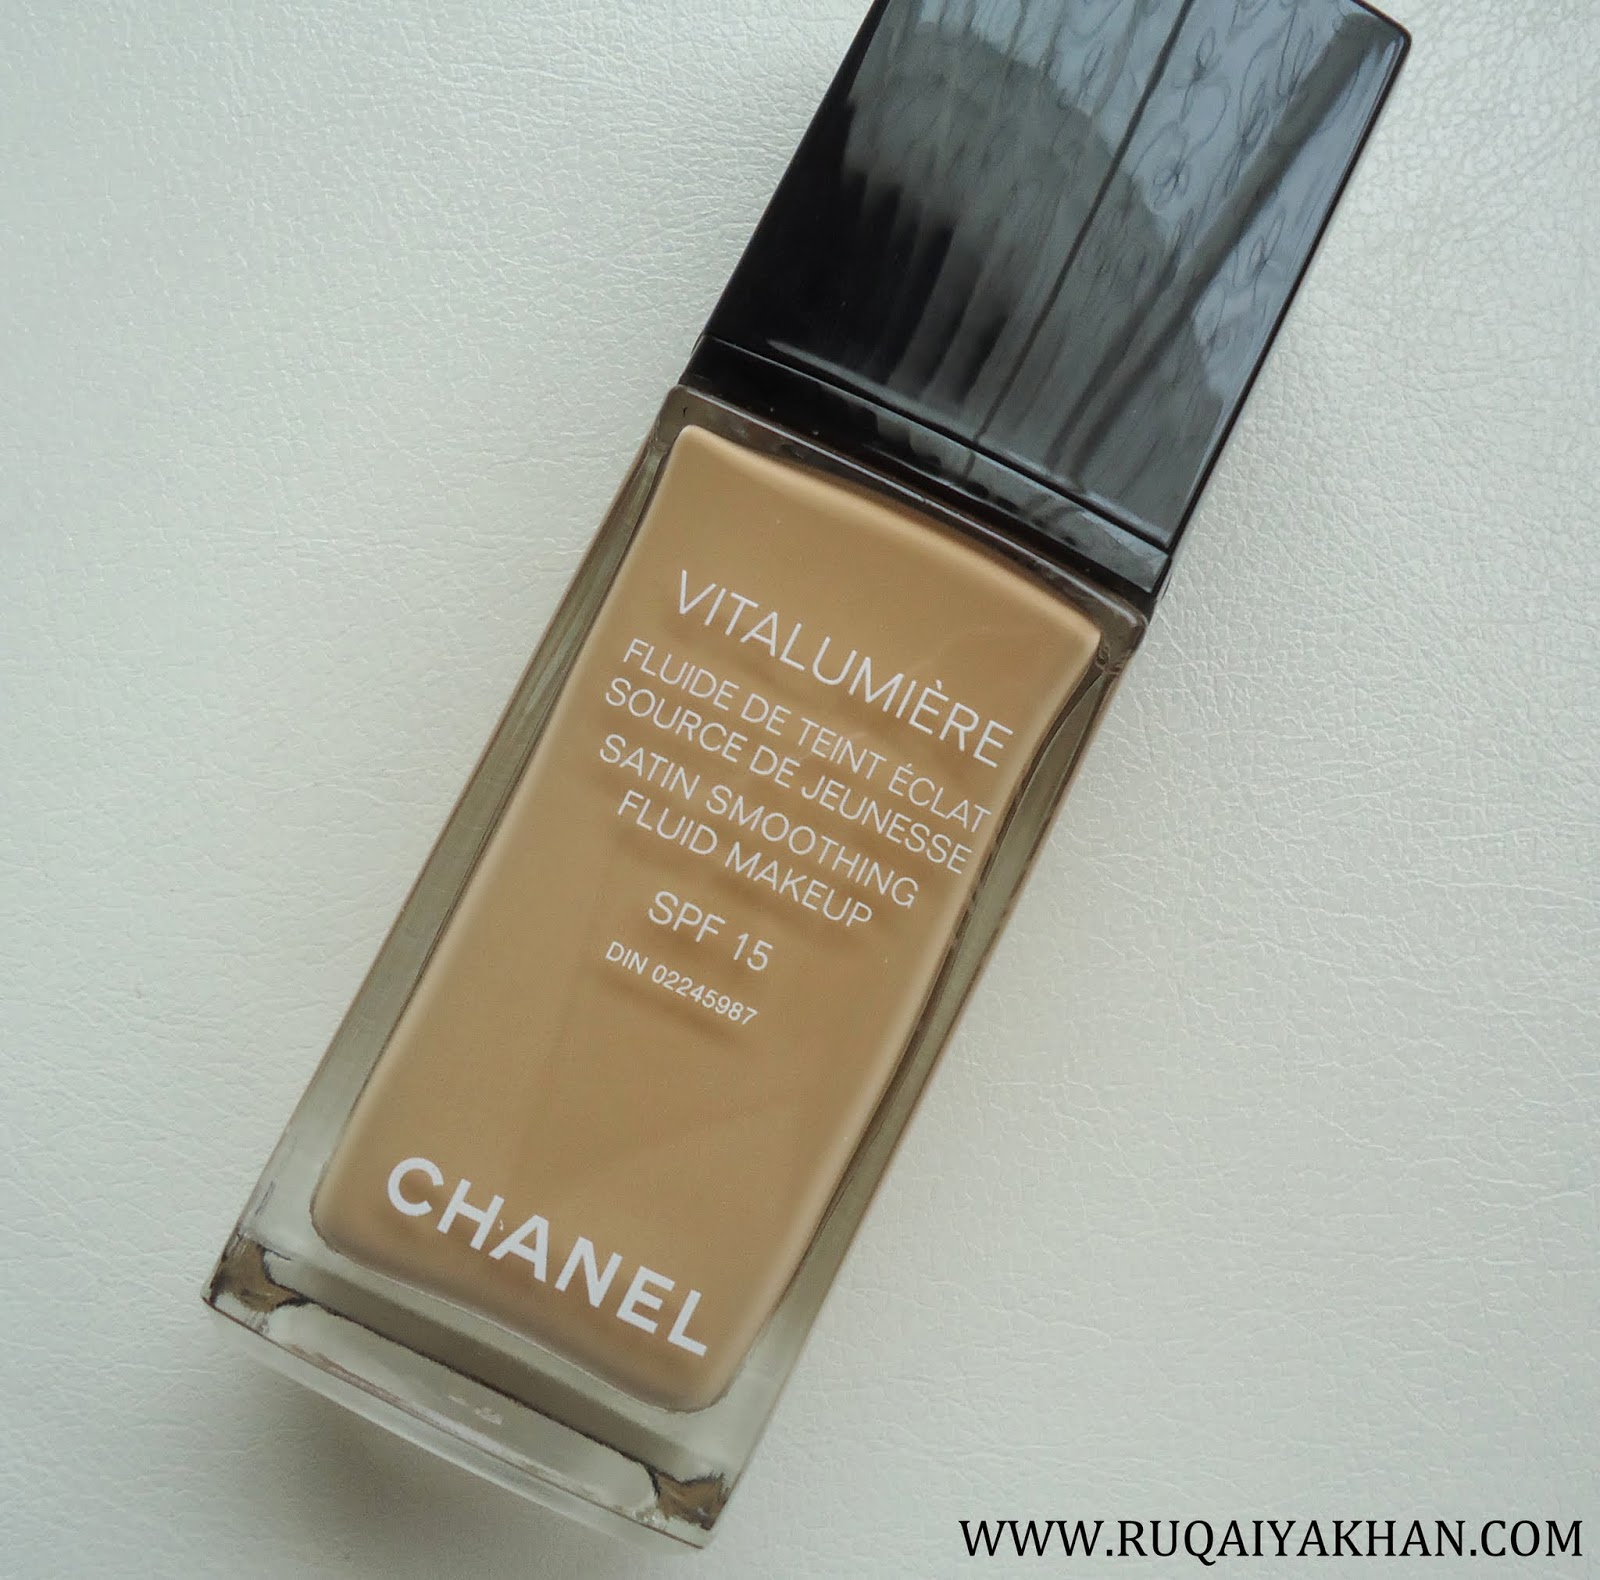 chanel vitalumiere satin smoothing fluid makeup review